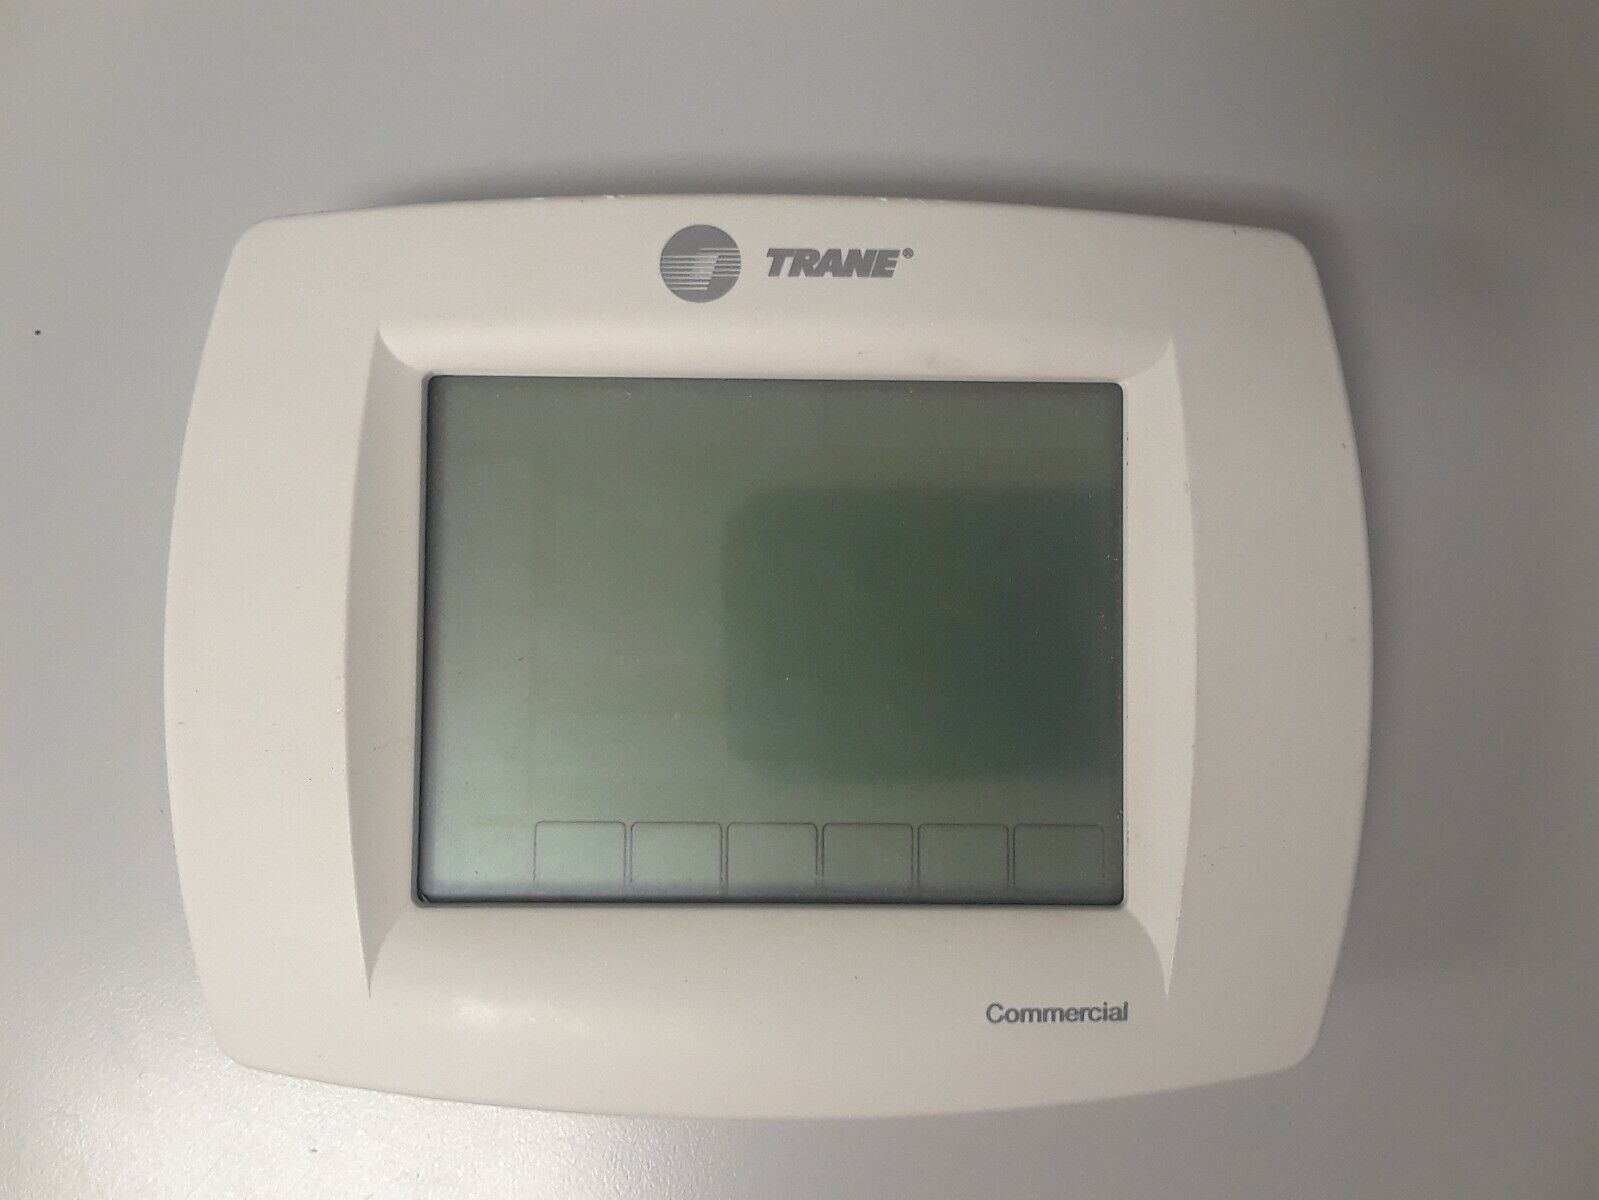 TRANE BAYSTAT052A Commercial 7 Day Programmable Thermostat HVAC X13511213-010